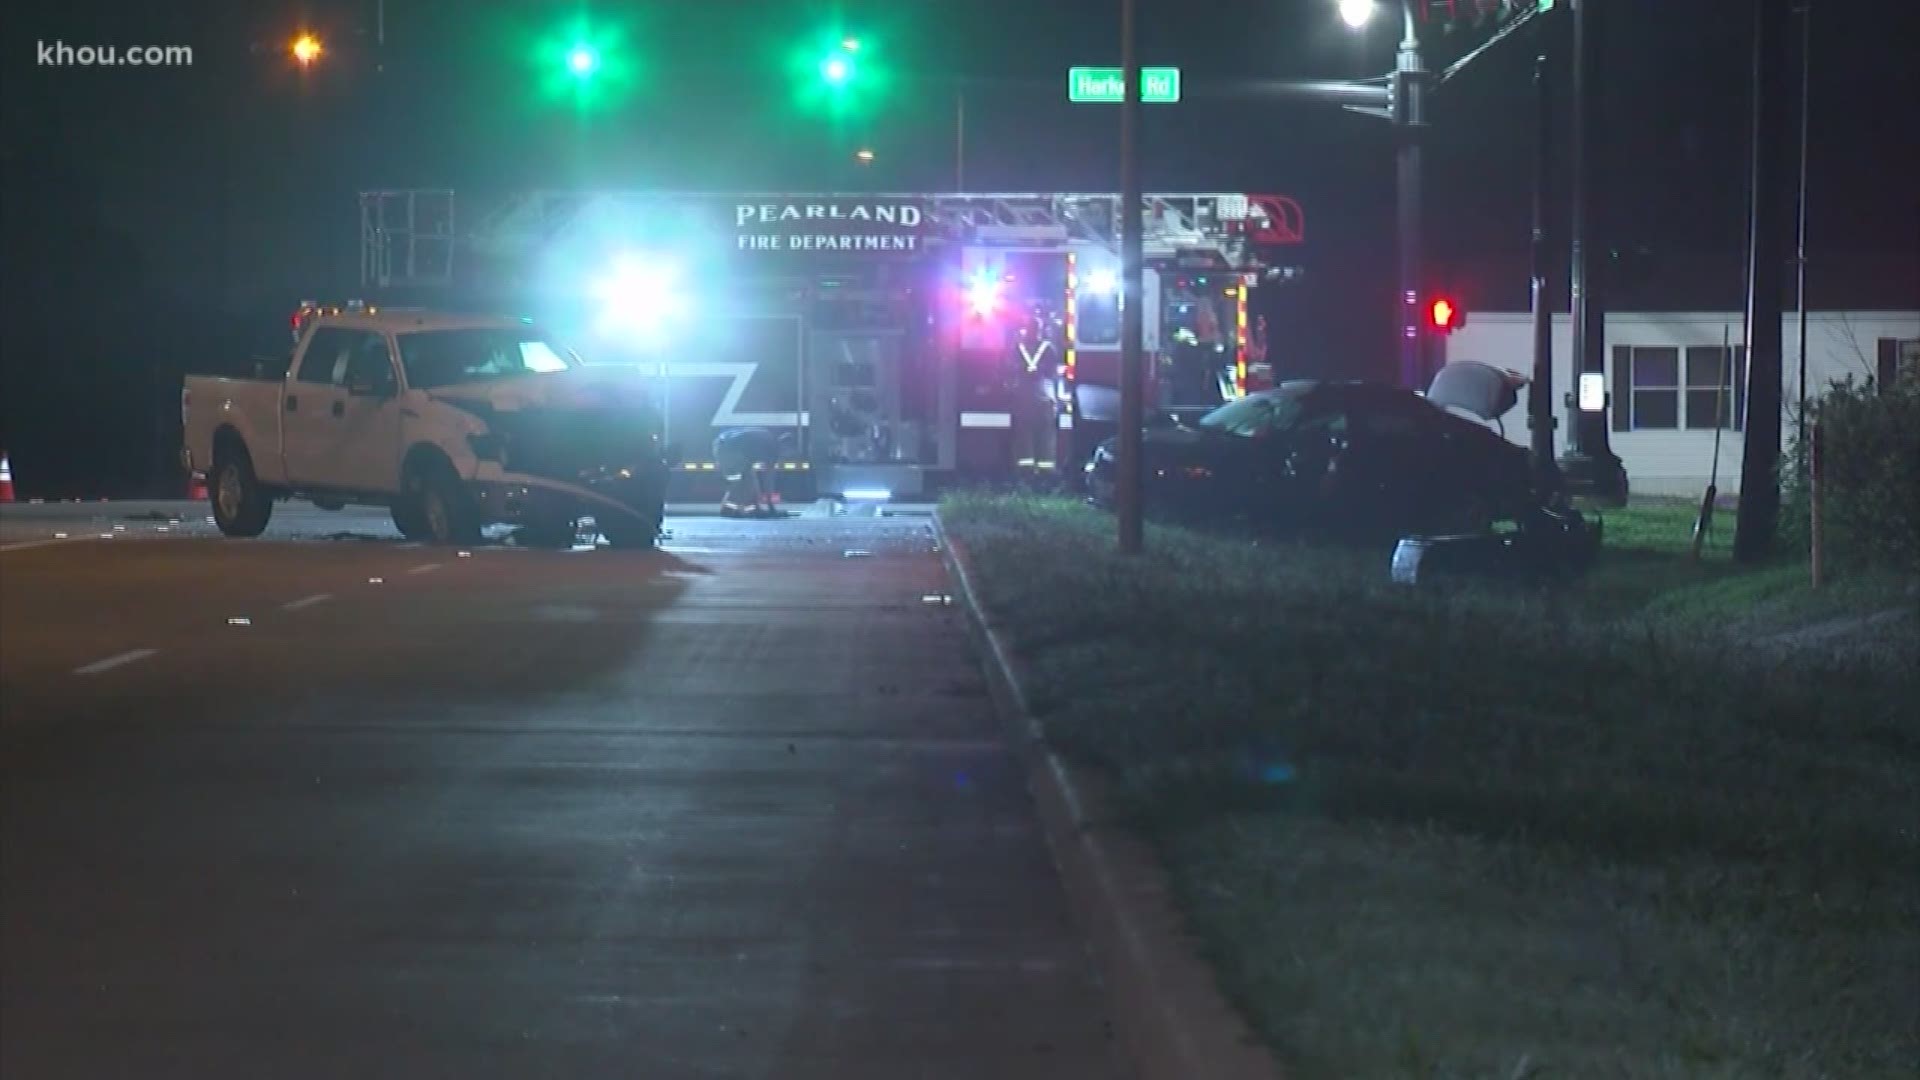 A driver has been charged with intoxication manslaughter after killing a mother and injuring her two children in a crash in Pearland.